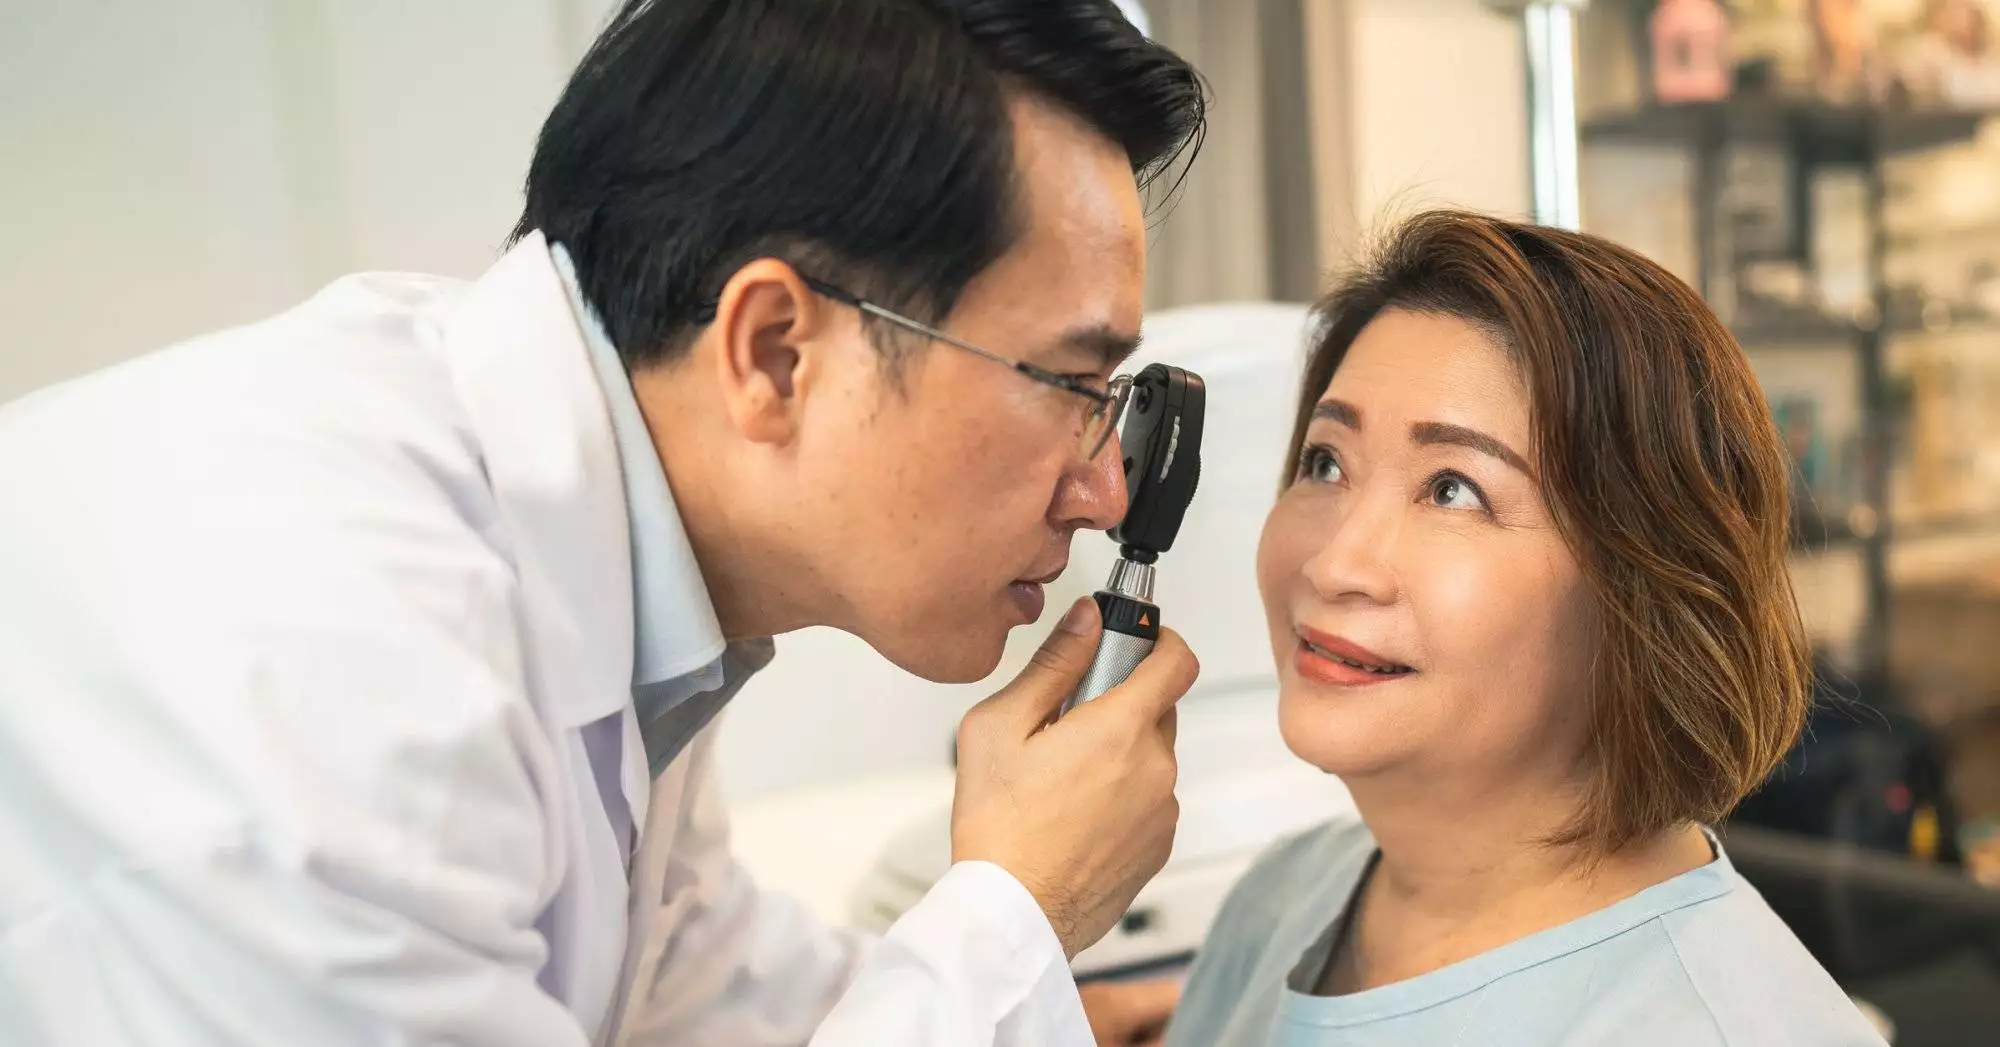 optometrist checking eyes condition of client before check eyesight in optical store